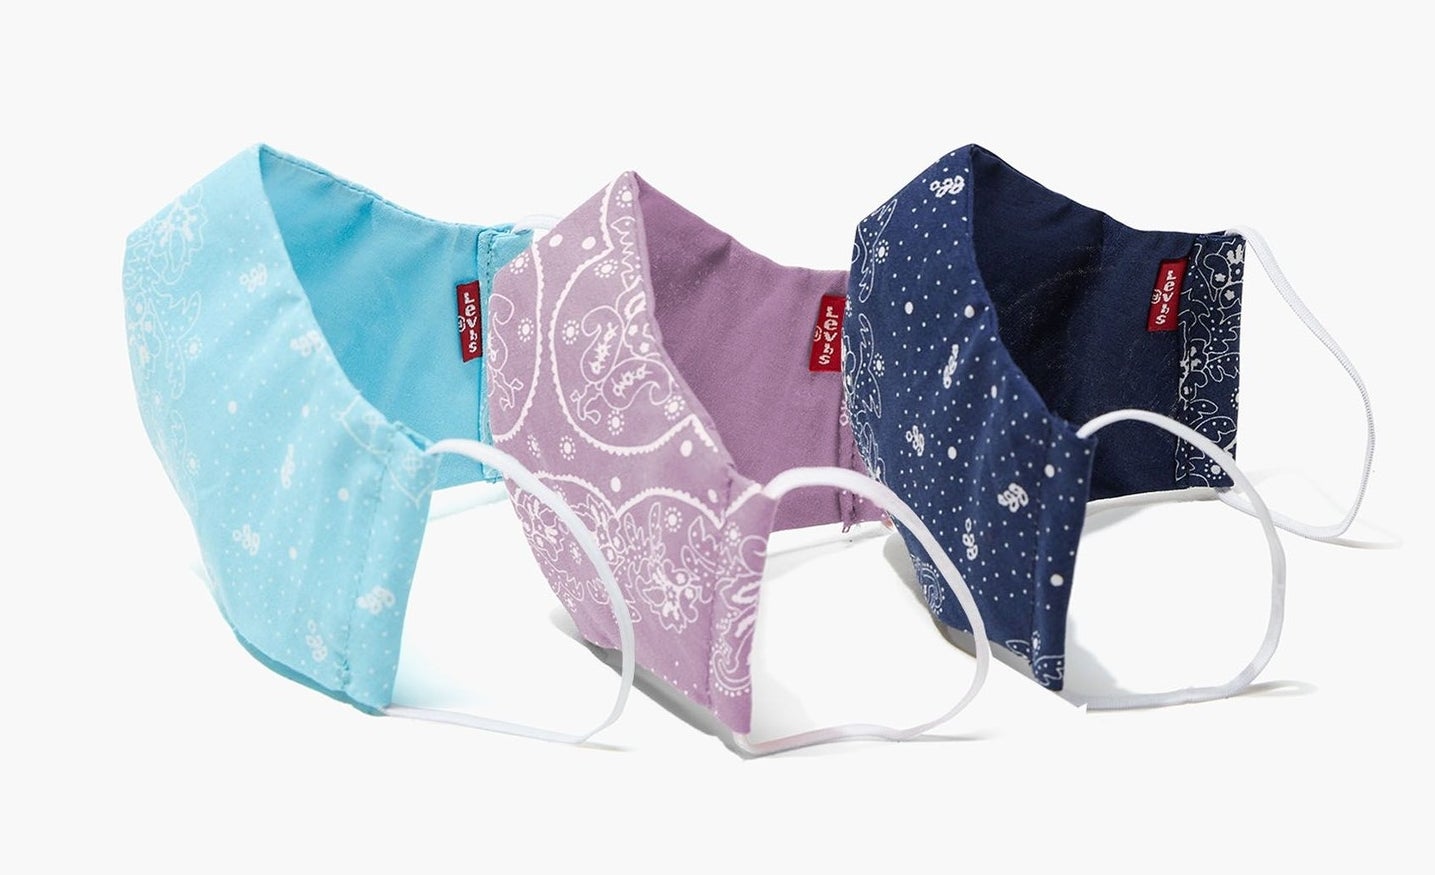 three bandana printed face masks in light blue, purple, and navy